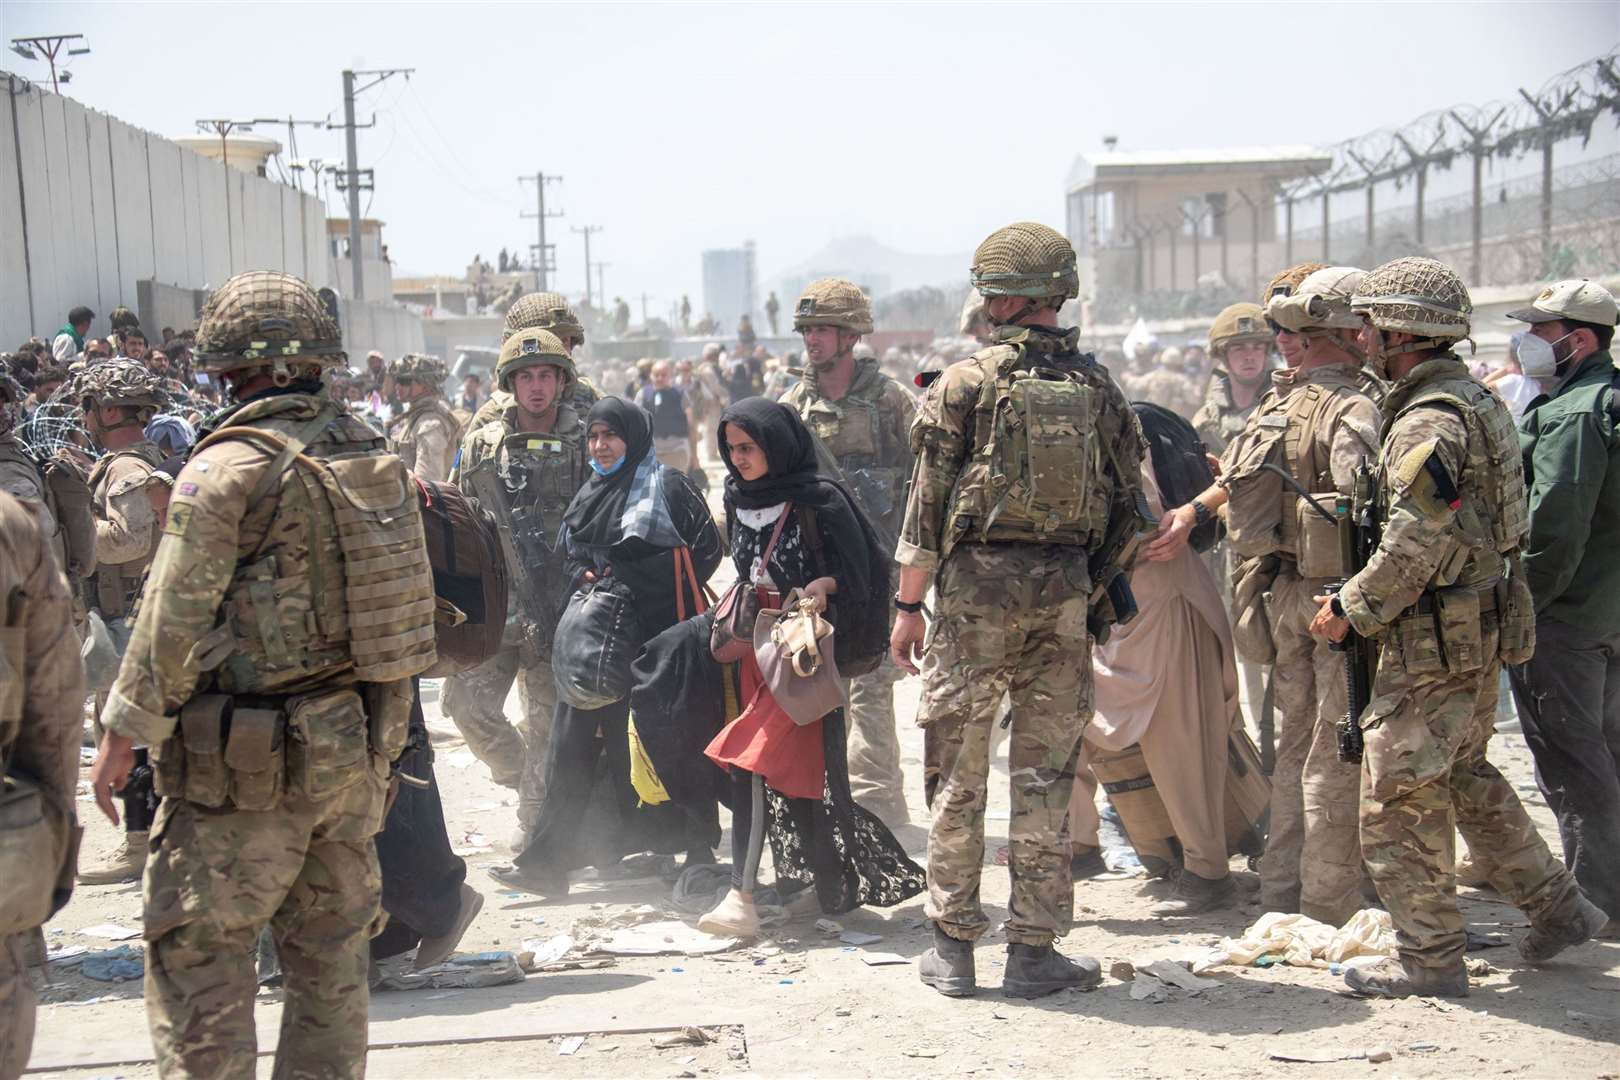 Thousands of refugees are fleeing Afghanistan after the Taliban takeover. Picture: MoD